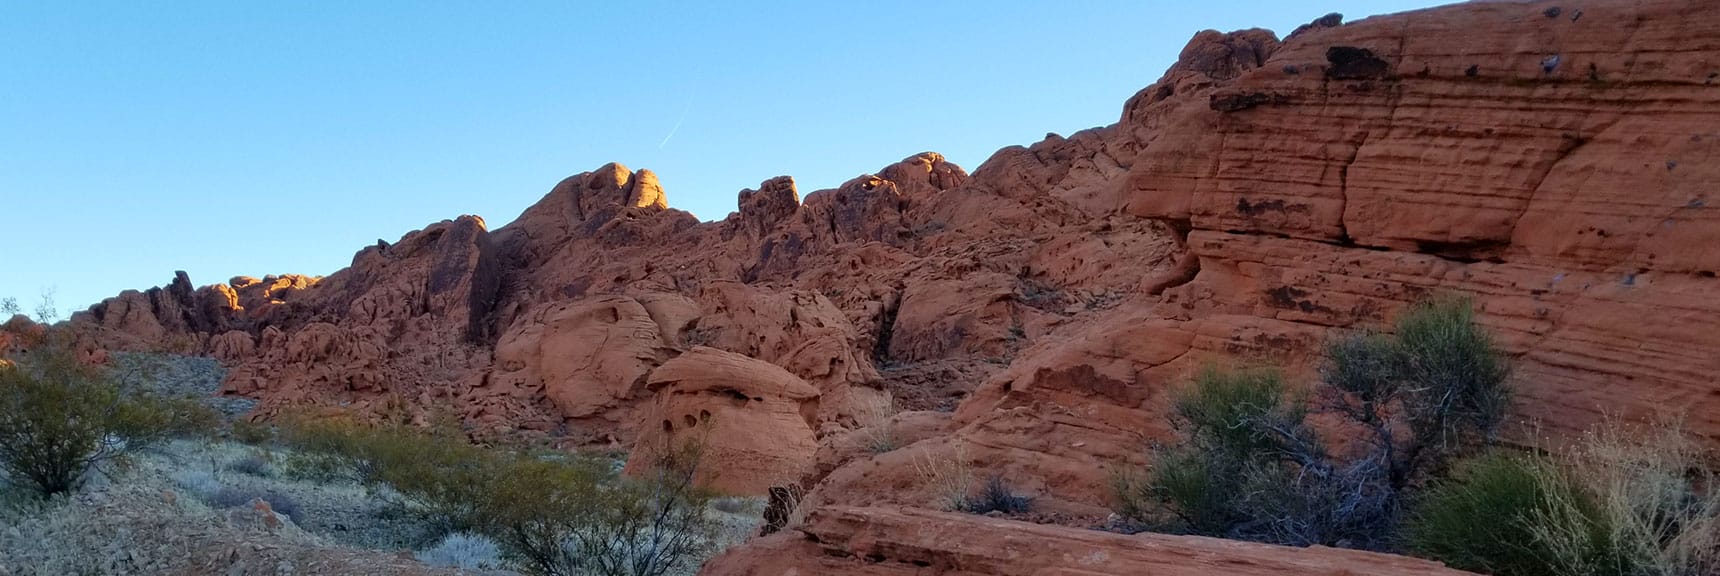 Moving Through the Pass on Prospect Trail in Valley of Fire State Park, Nevada